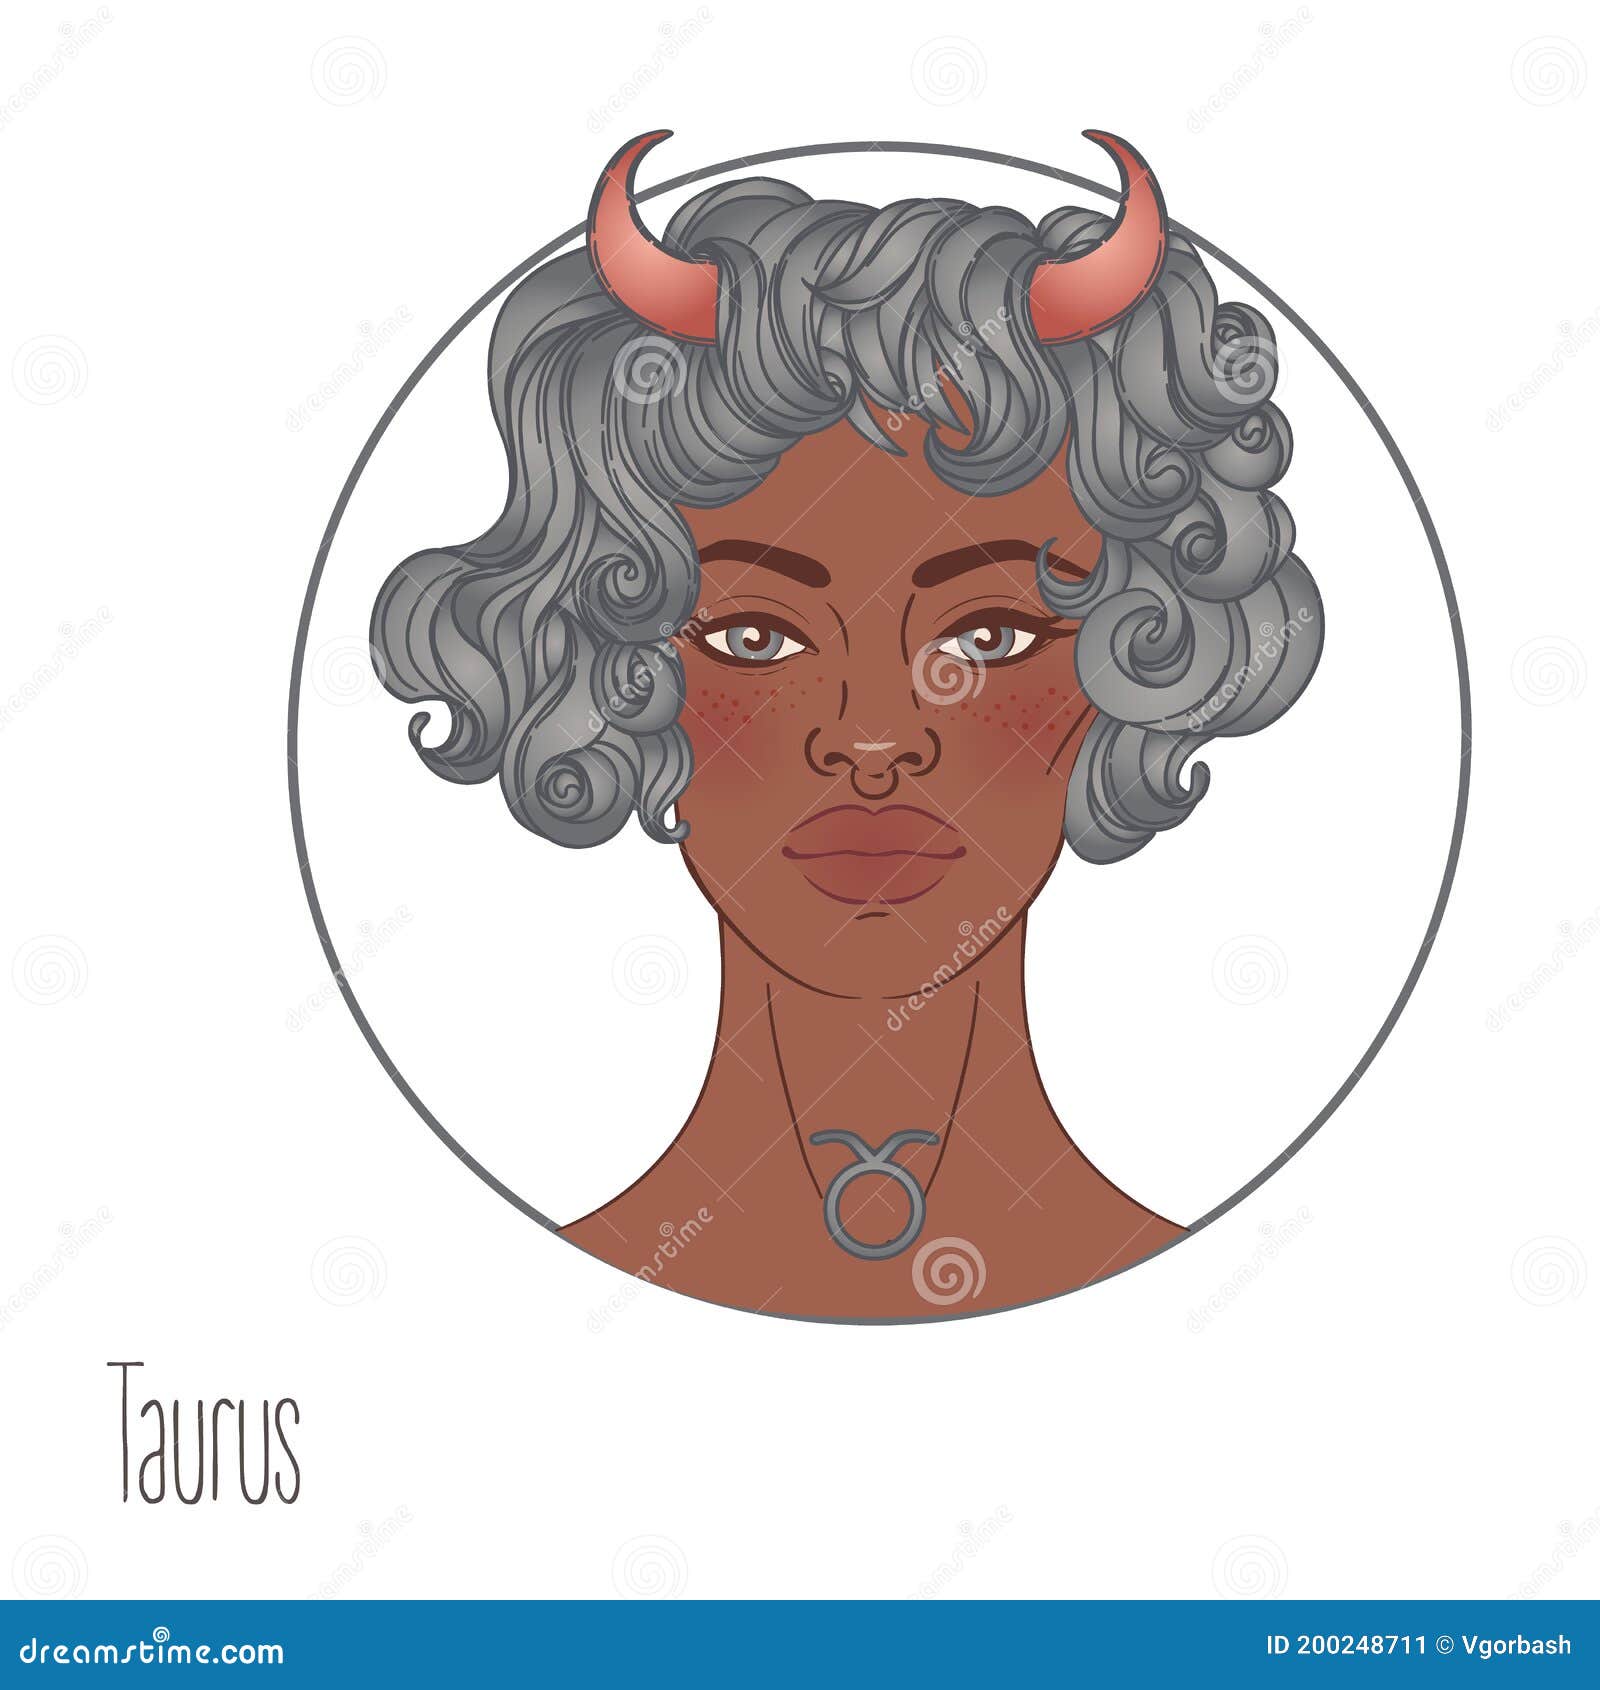 Illustration of Taurus Astrological Sign As a Beautiful African ...